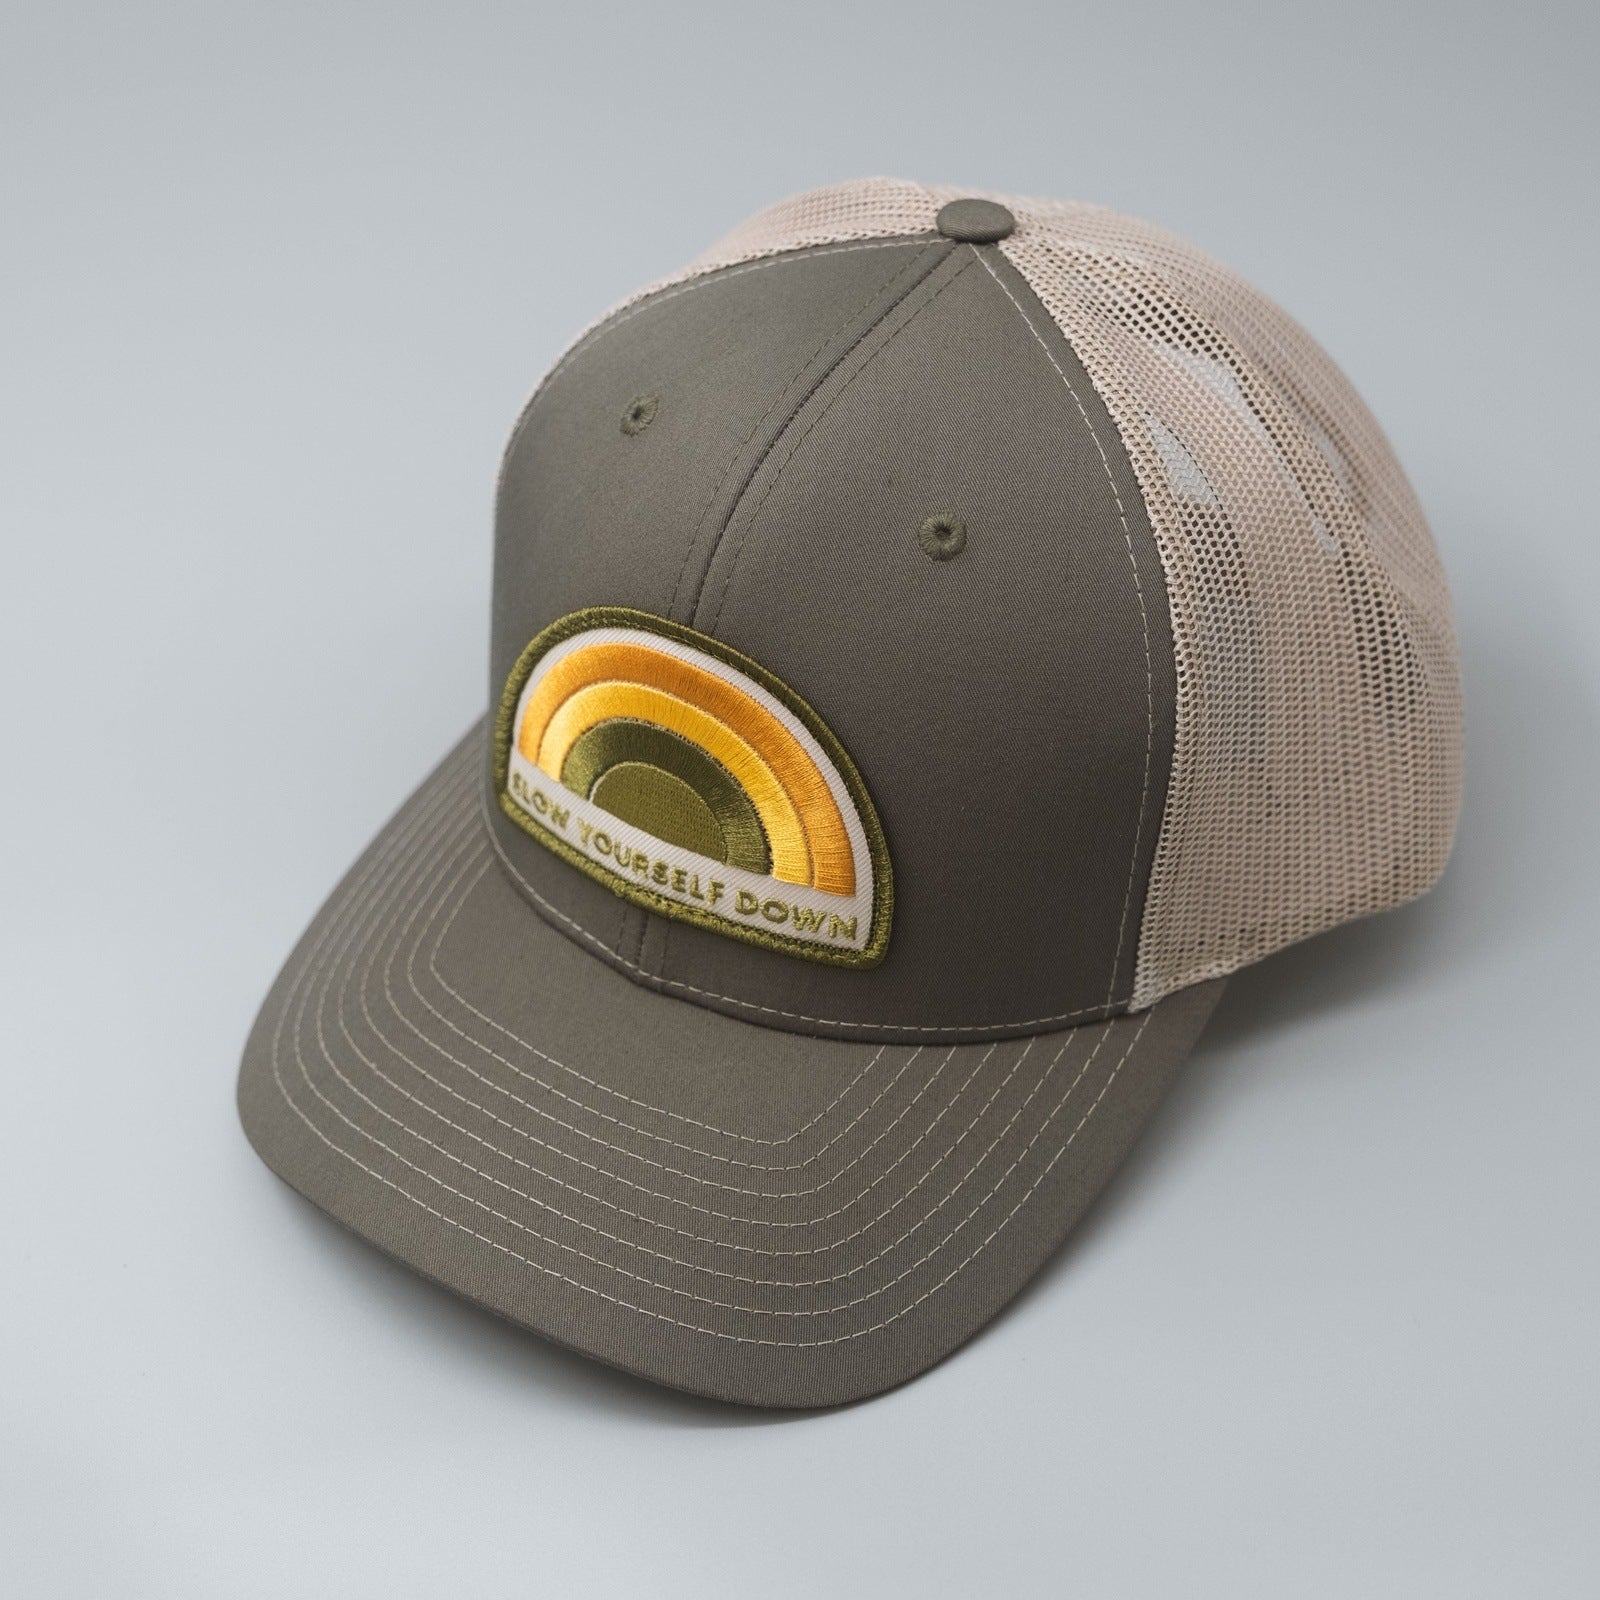 Recycled Rainbow Trucker Hat Hats - Slow Yourself Down